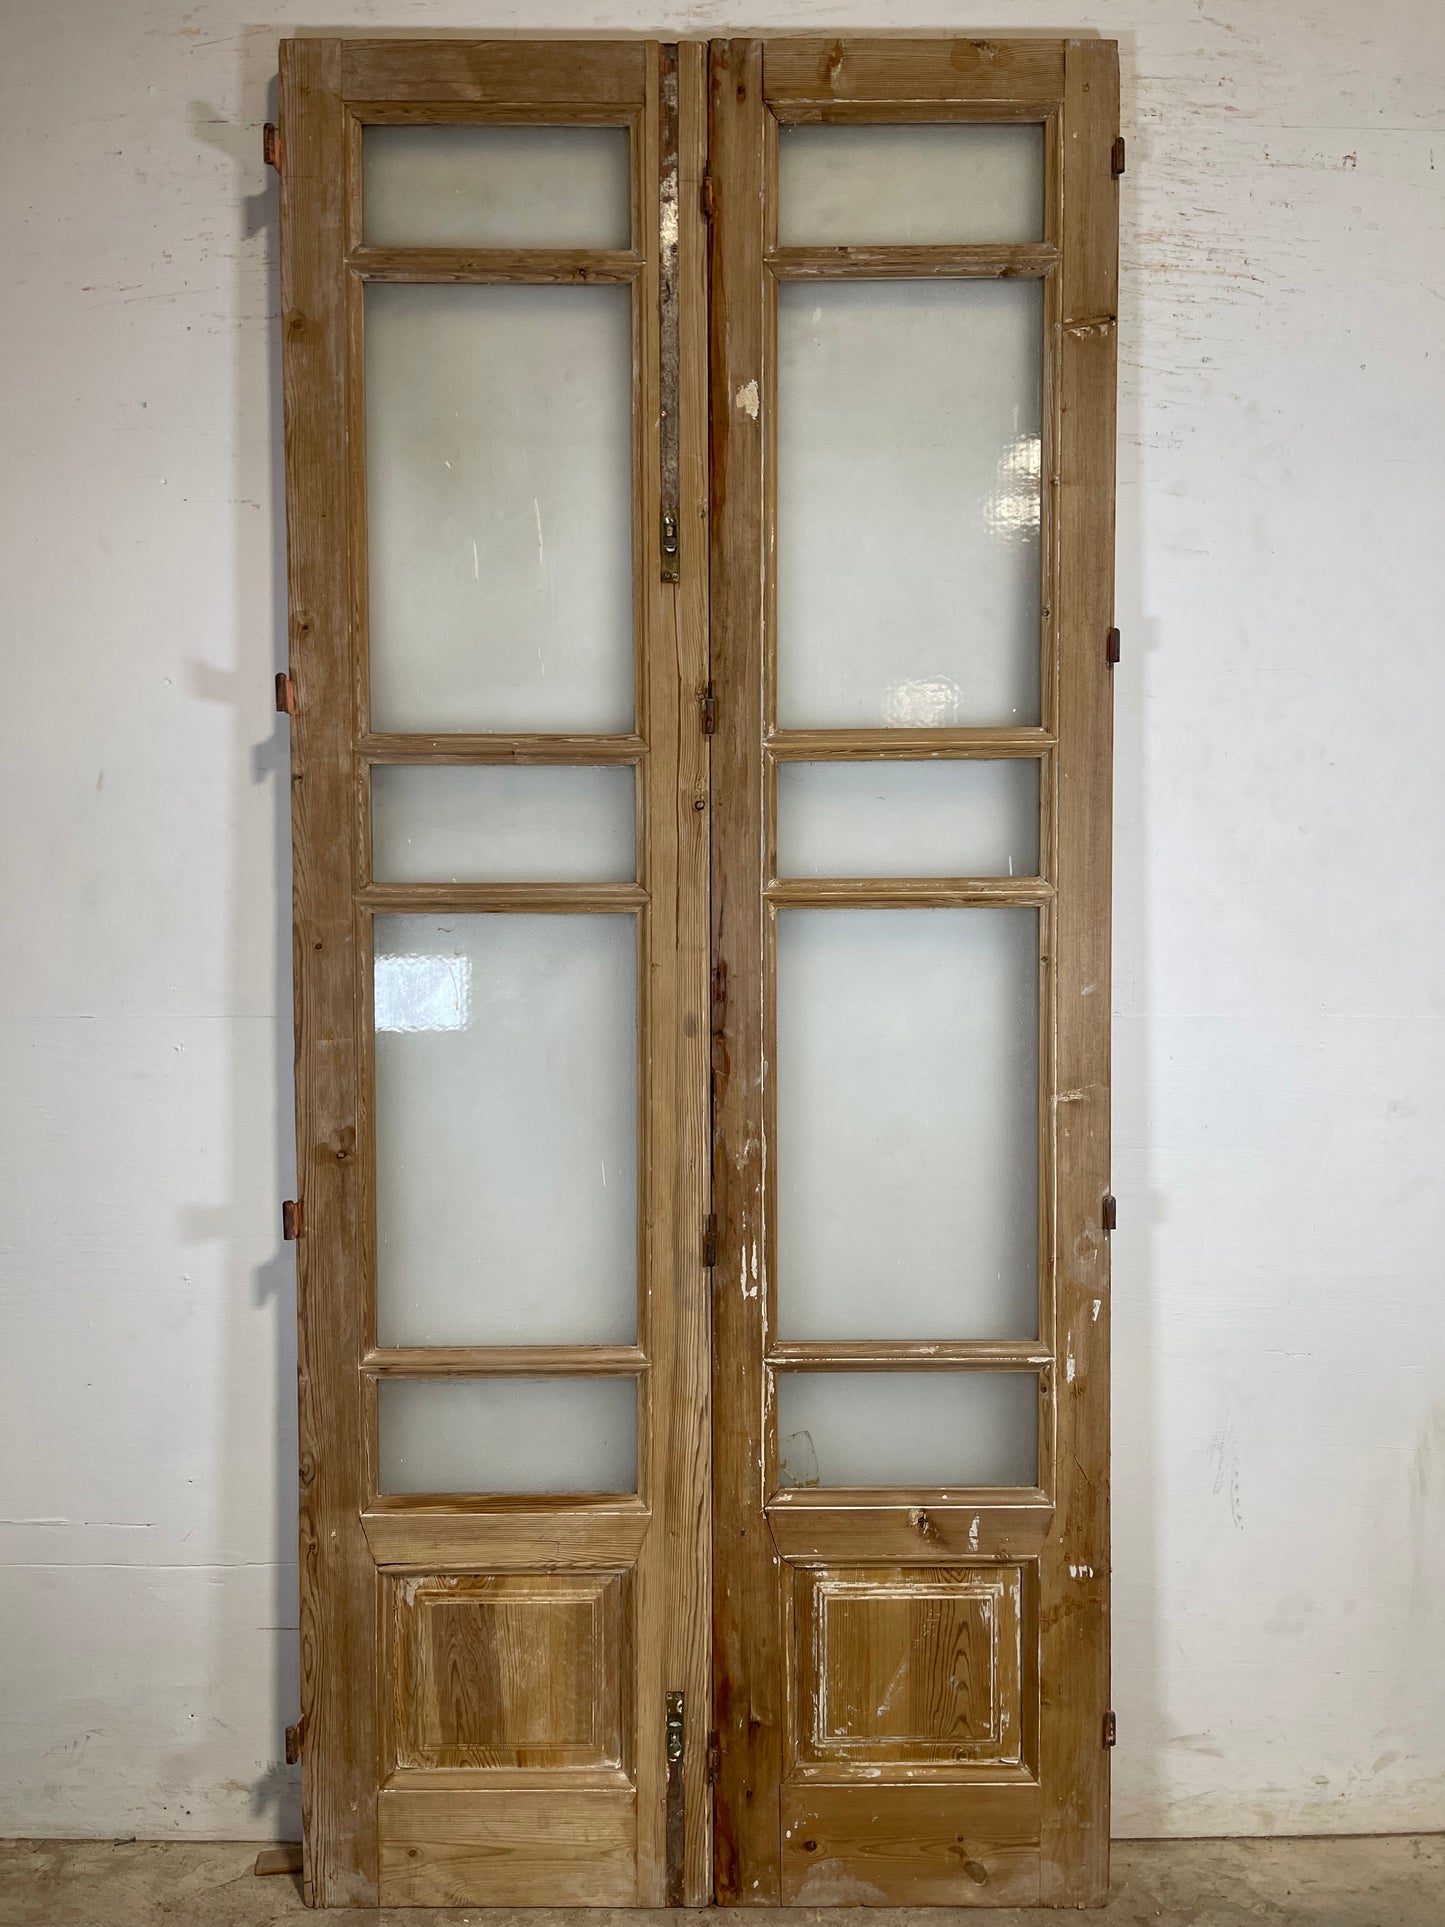 Antique French Panel Doors with glass  (99.25x44)  K324